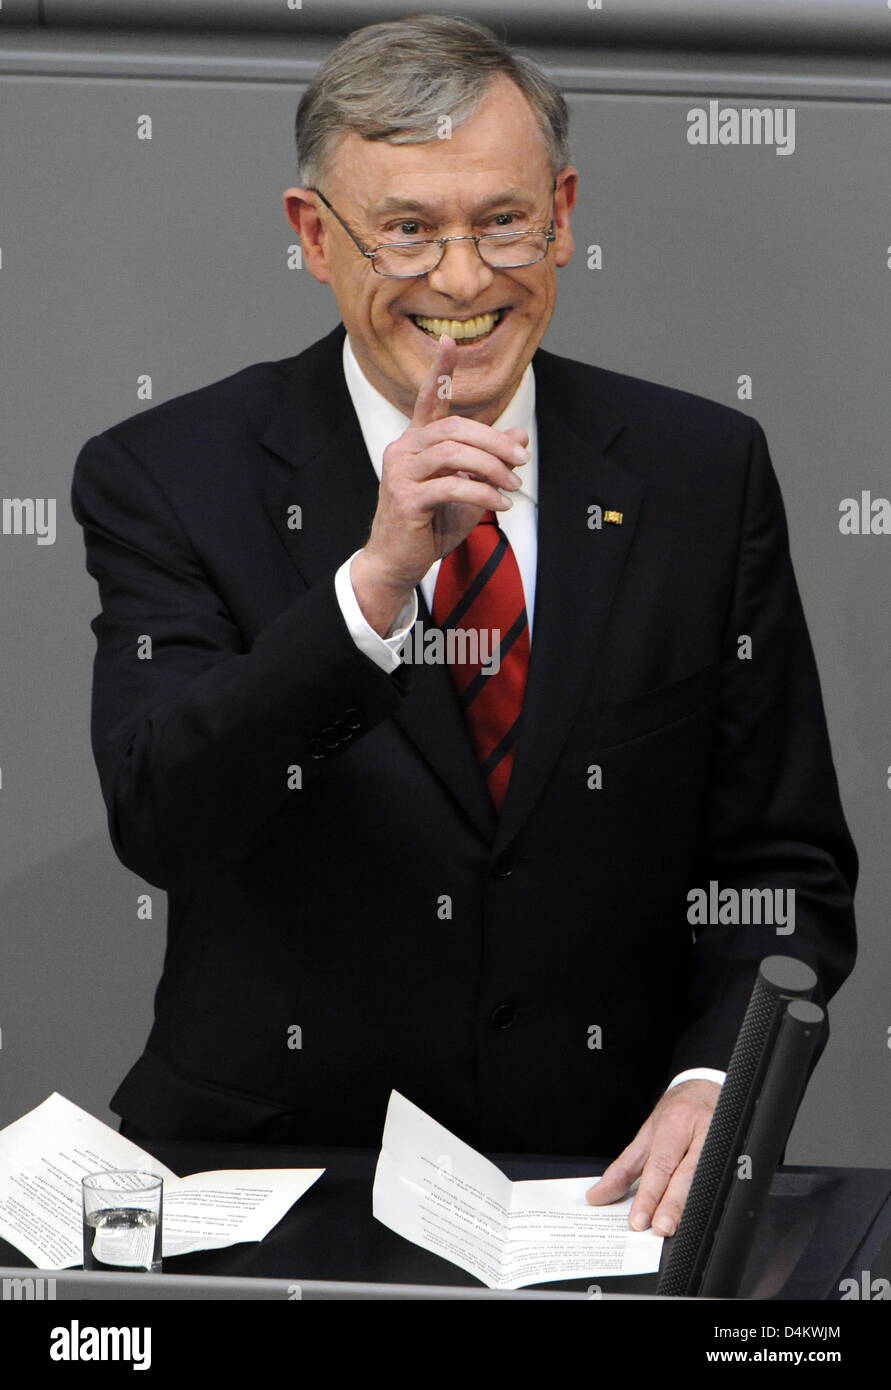 Federal German President Horst Koehler laughs during his speech after his reelection at the 13th Federal Convention in the plenar hall of the Reichstag building in Berlin, Germany, 23 May 2009. Koehler won the election with 613 votes, the minimum number of necessary votes. Photo: Tim Brakemeier Stock Photo